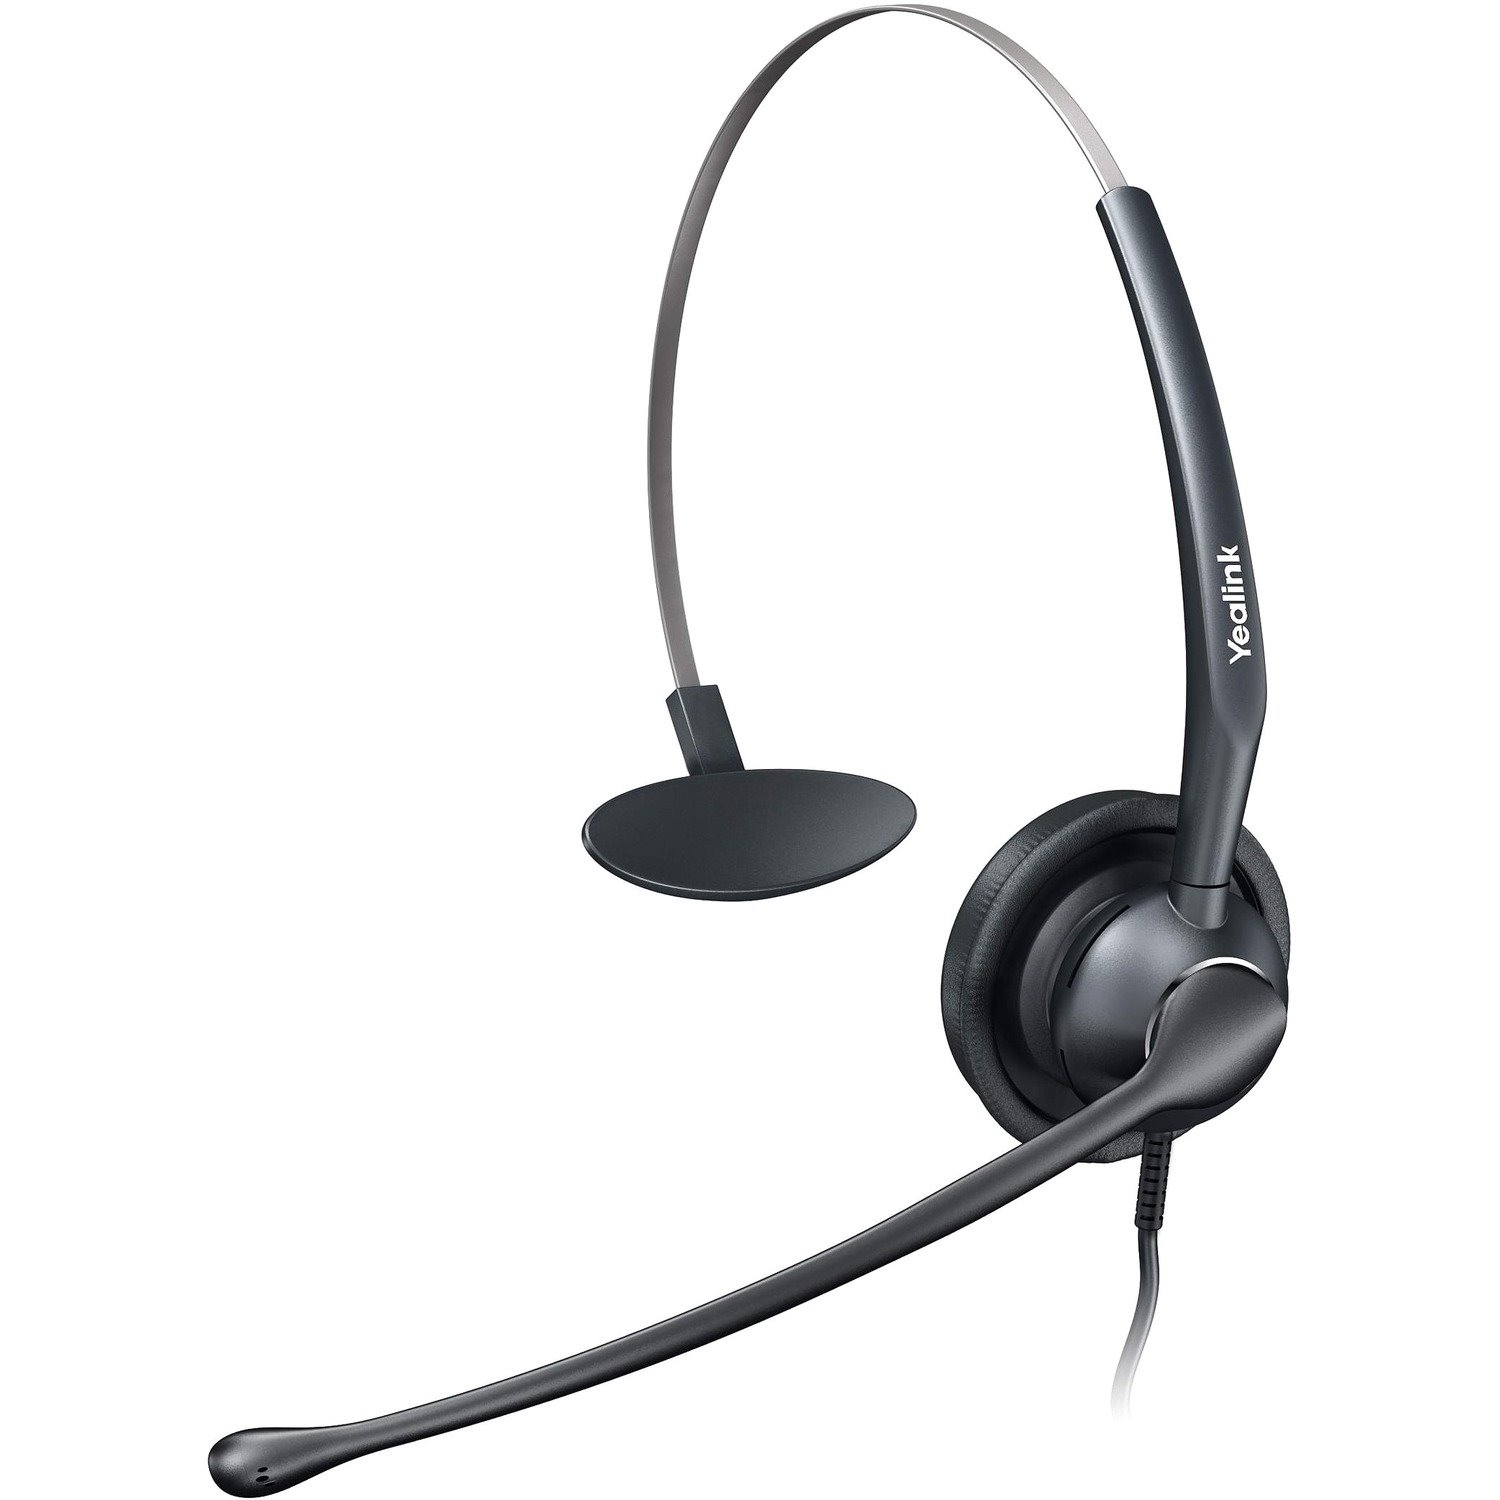 Yealink YHS33 Wired Over-the-head Mono Headset